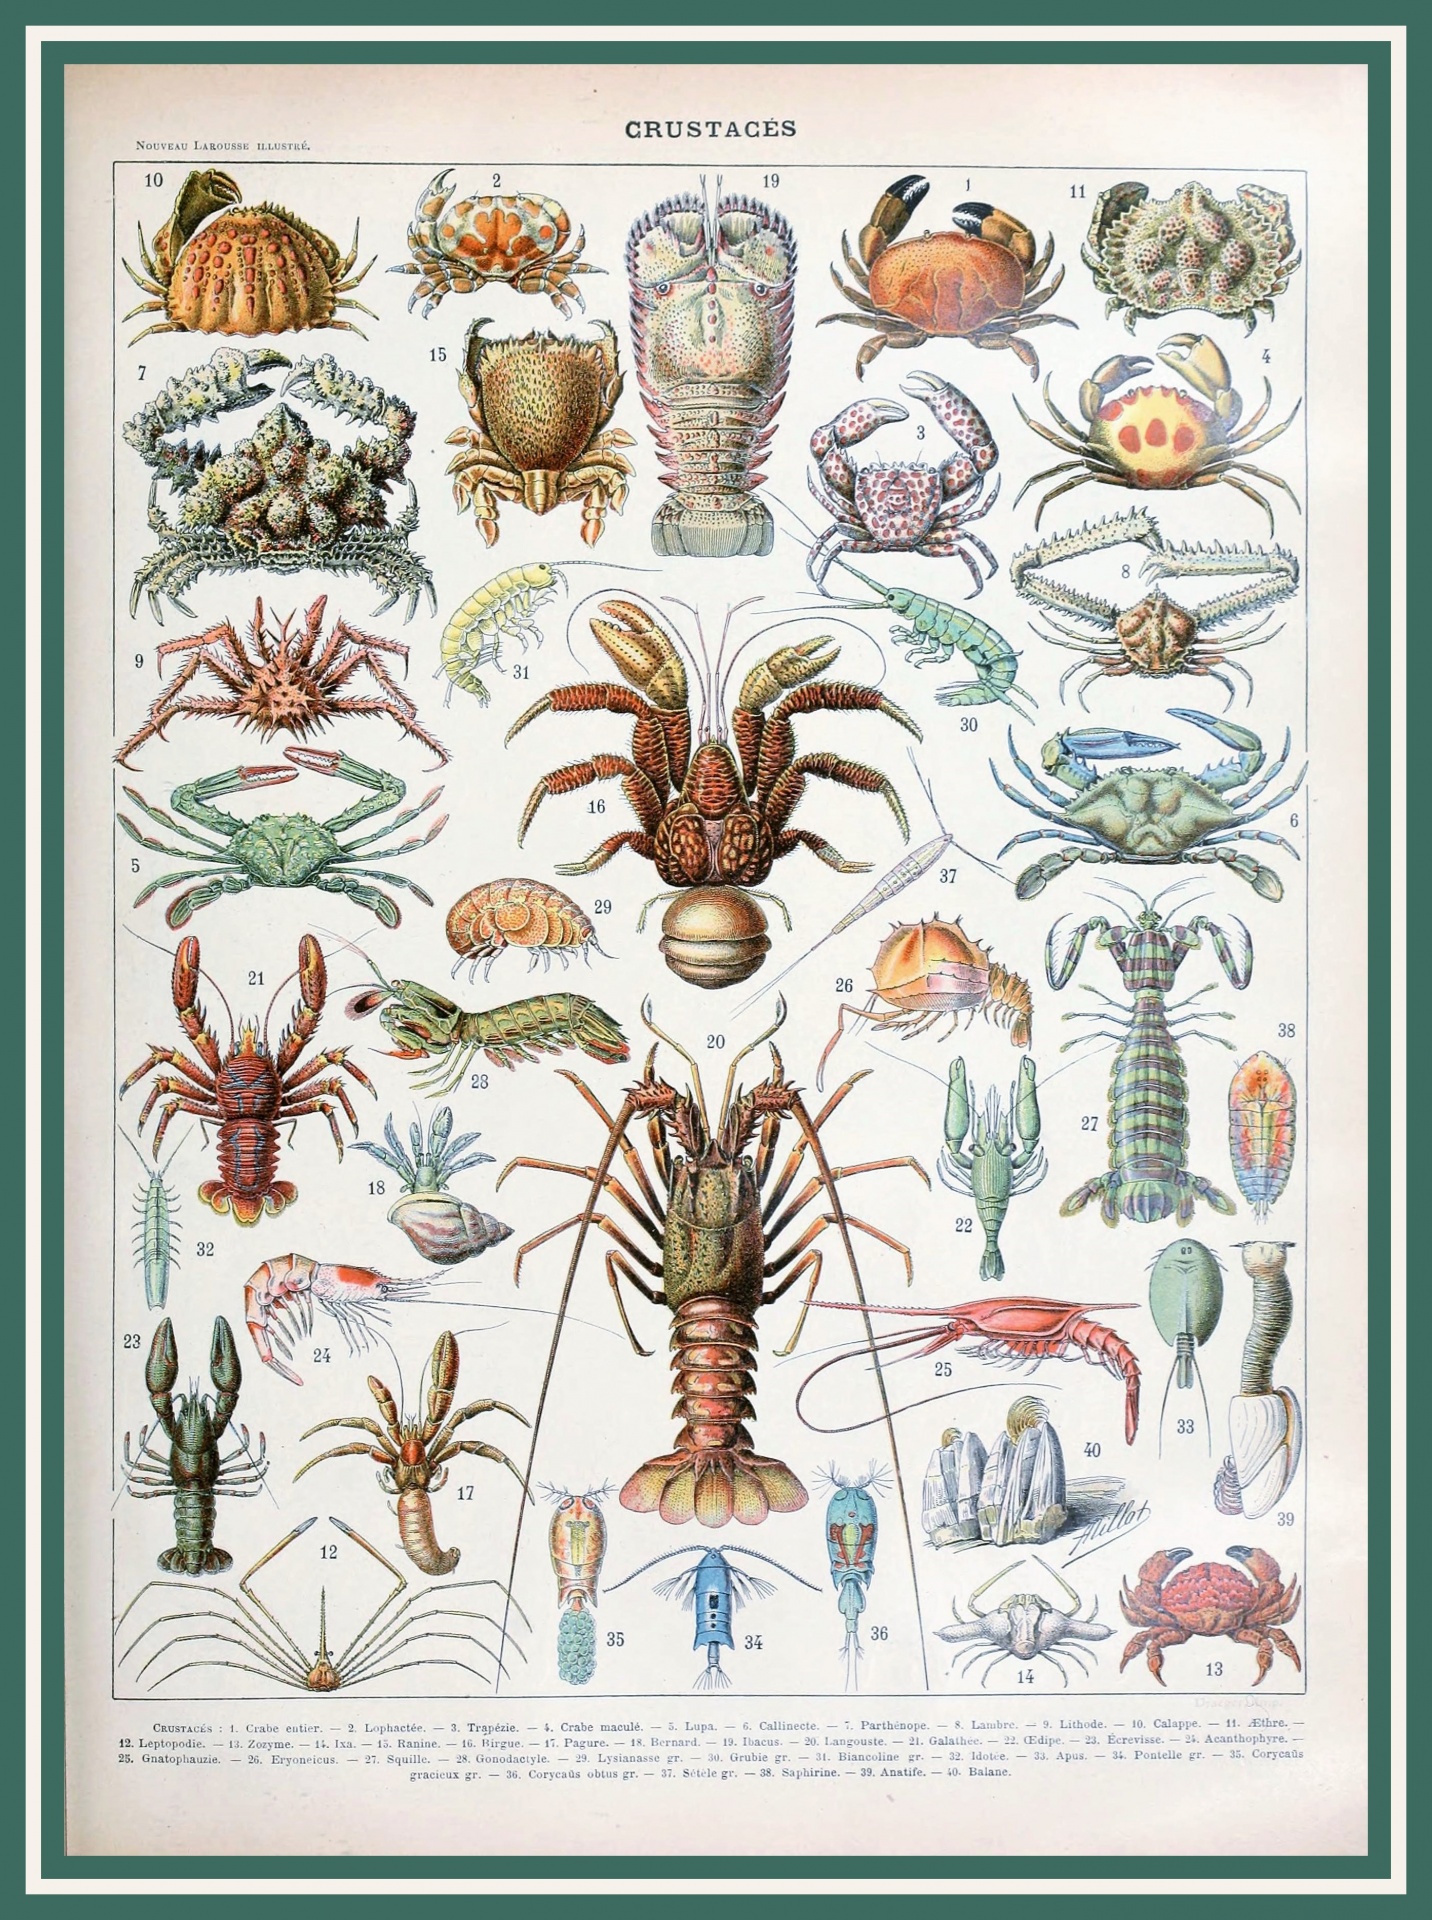 Crustaceans By Adolphe Millot